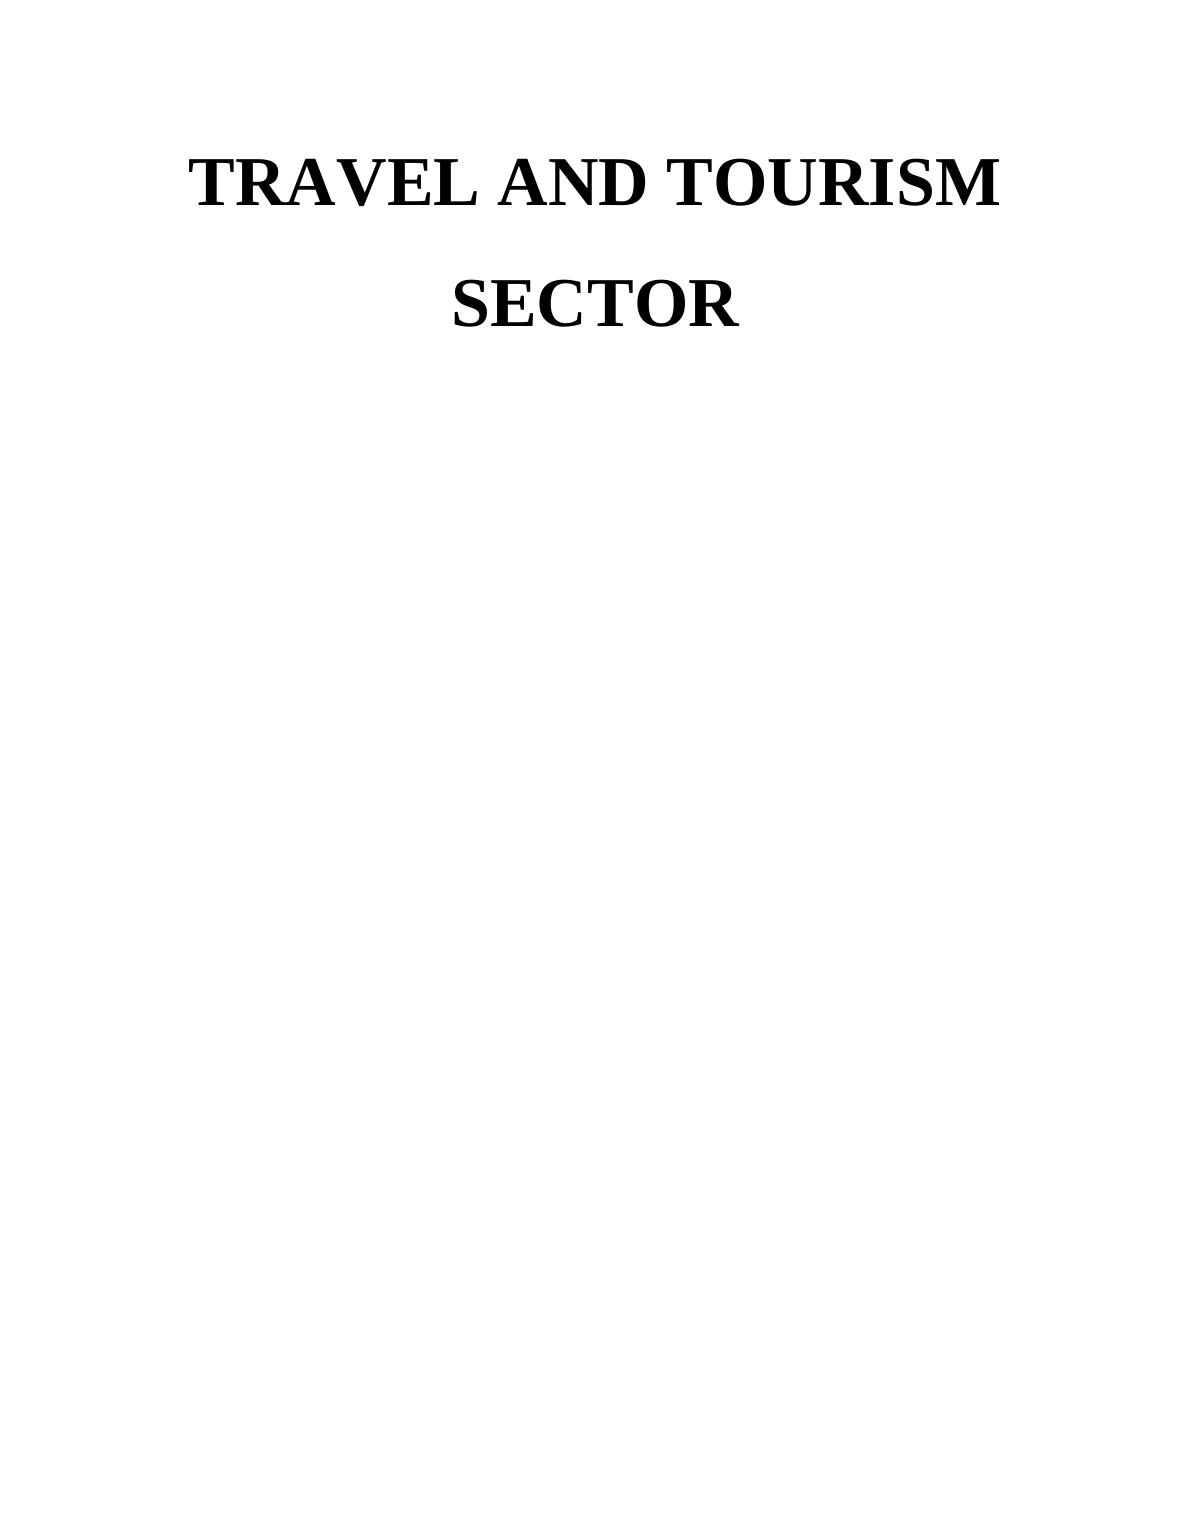 Scenario of the Travel and Tourism Sector | Report_1